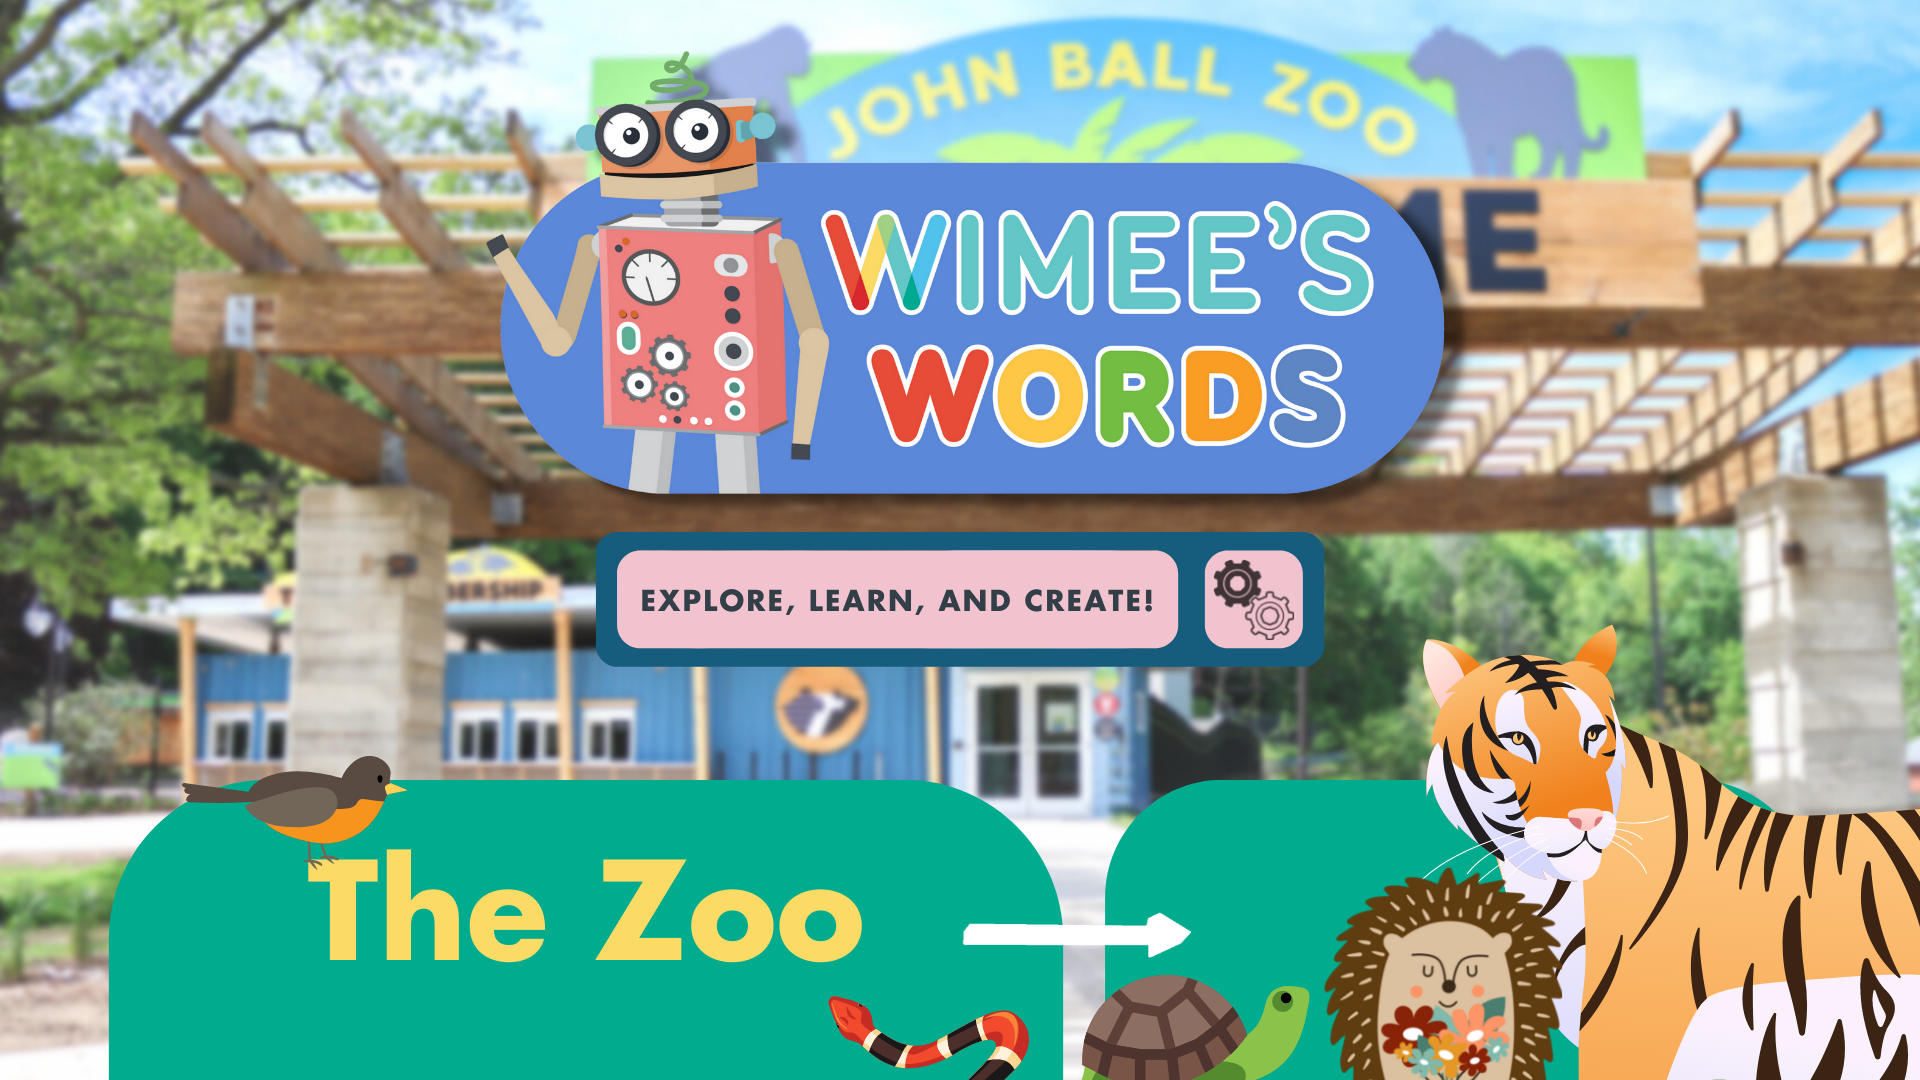 An out of focus photo of the John Ball Zoo. The Wimee's Words logo, the title "The Zoo," and graphics of a tiger, turtle, snake, anf bird are over the image.